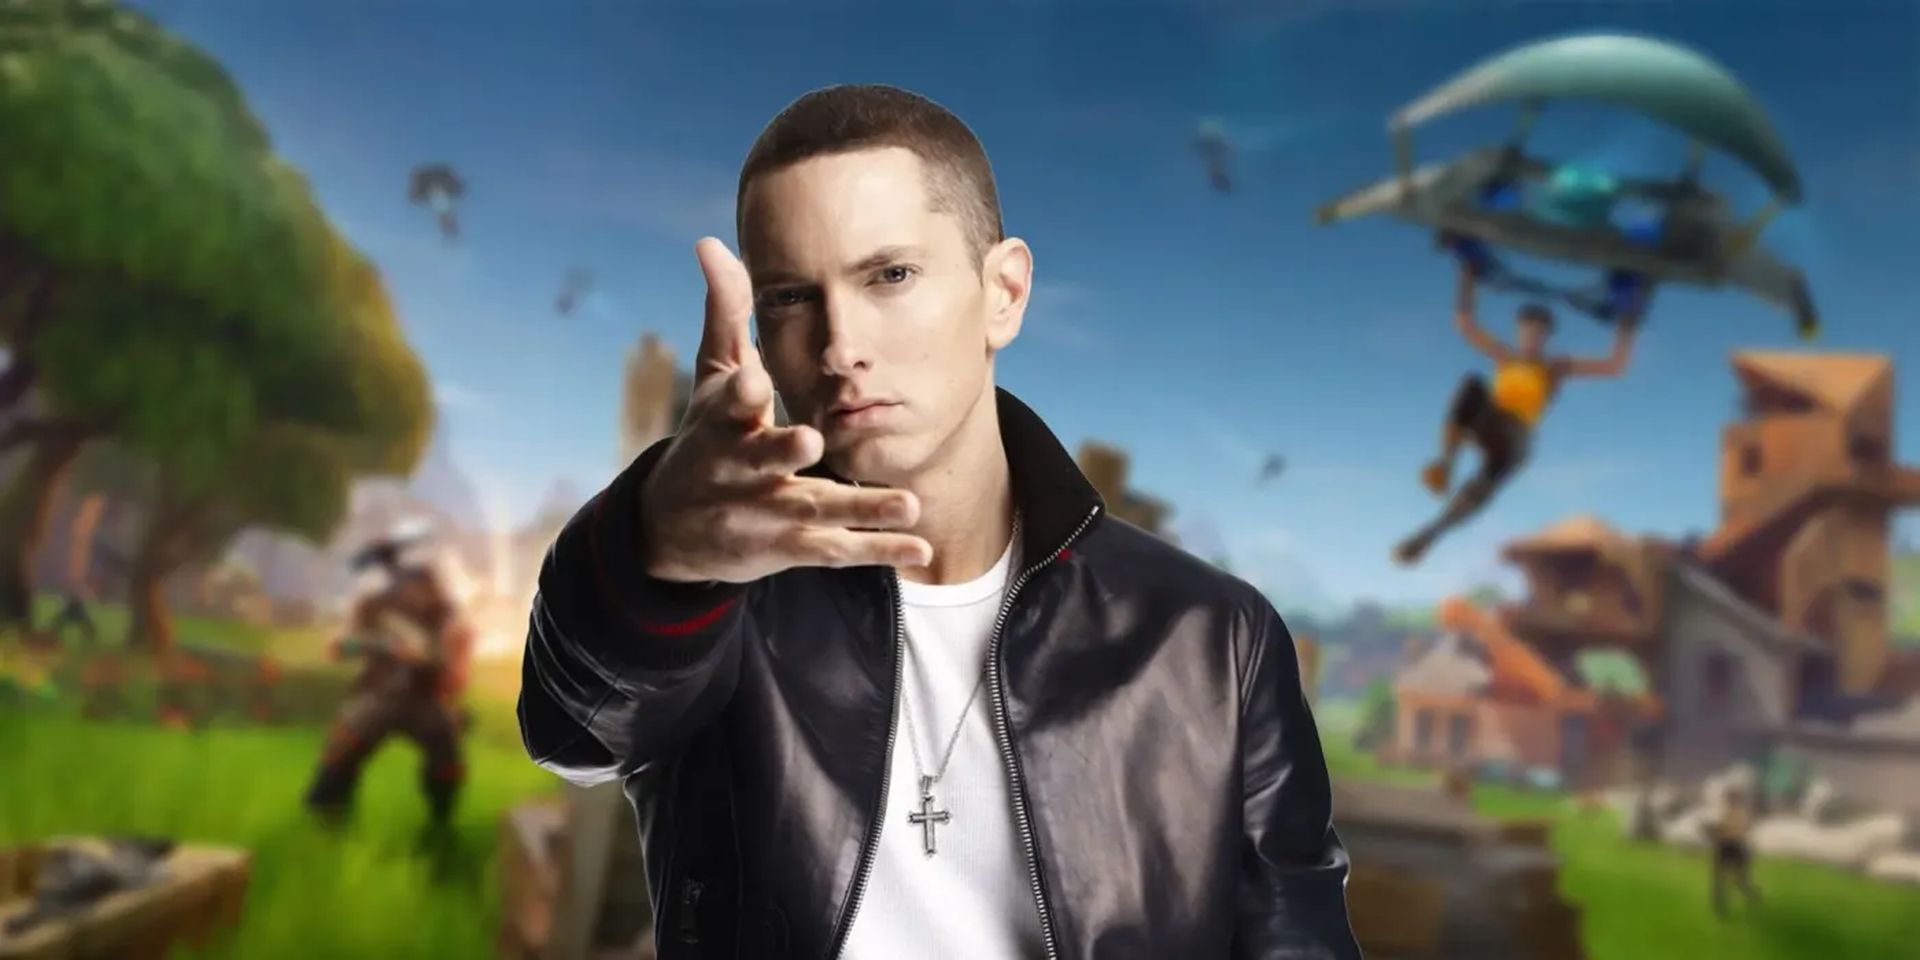 The latest ICONs radio playlist in the game hints at a possible Eminem Fortnite collab.